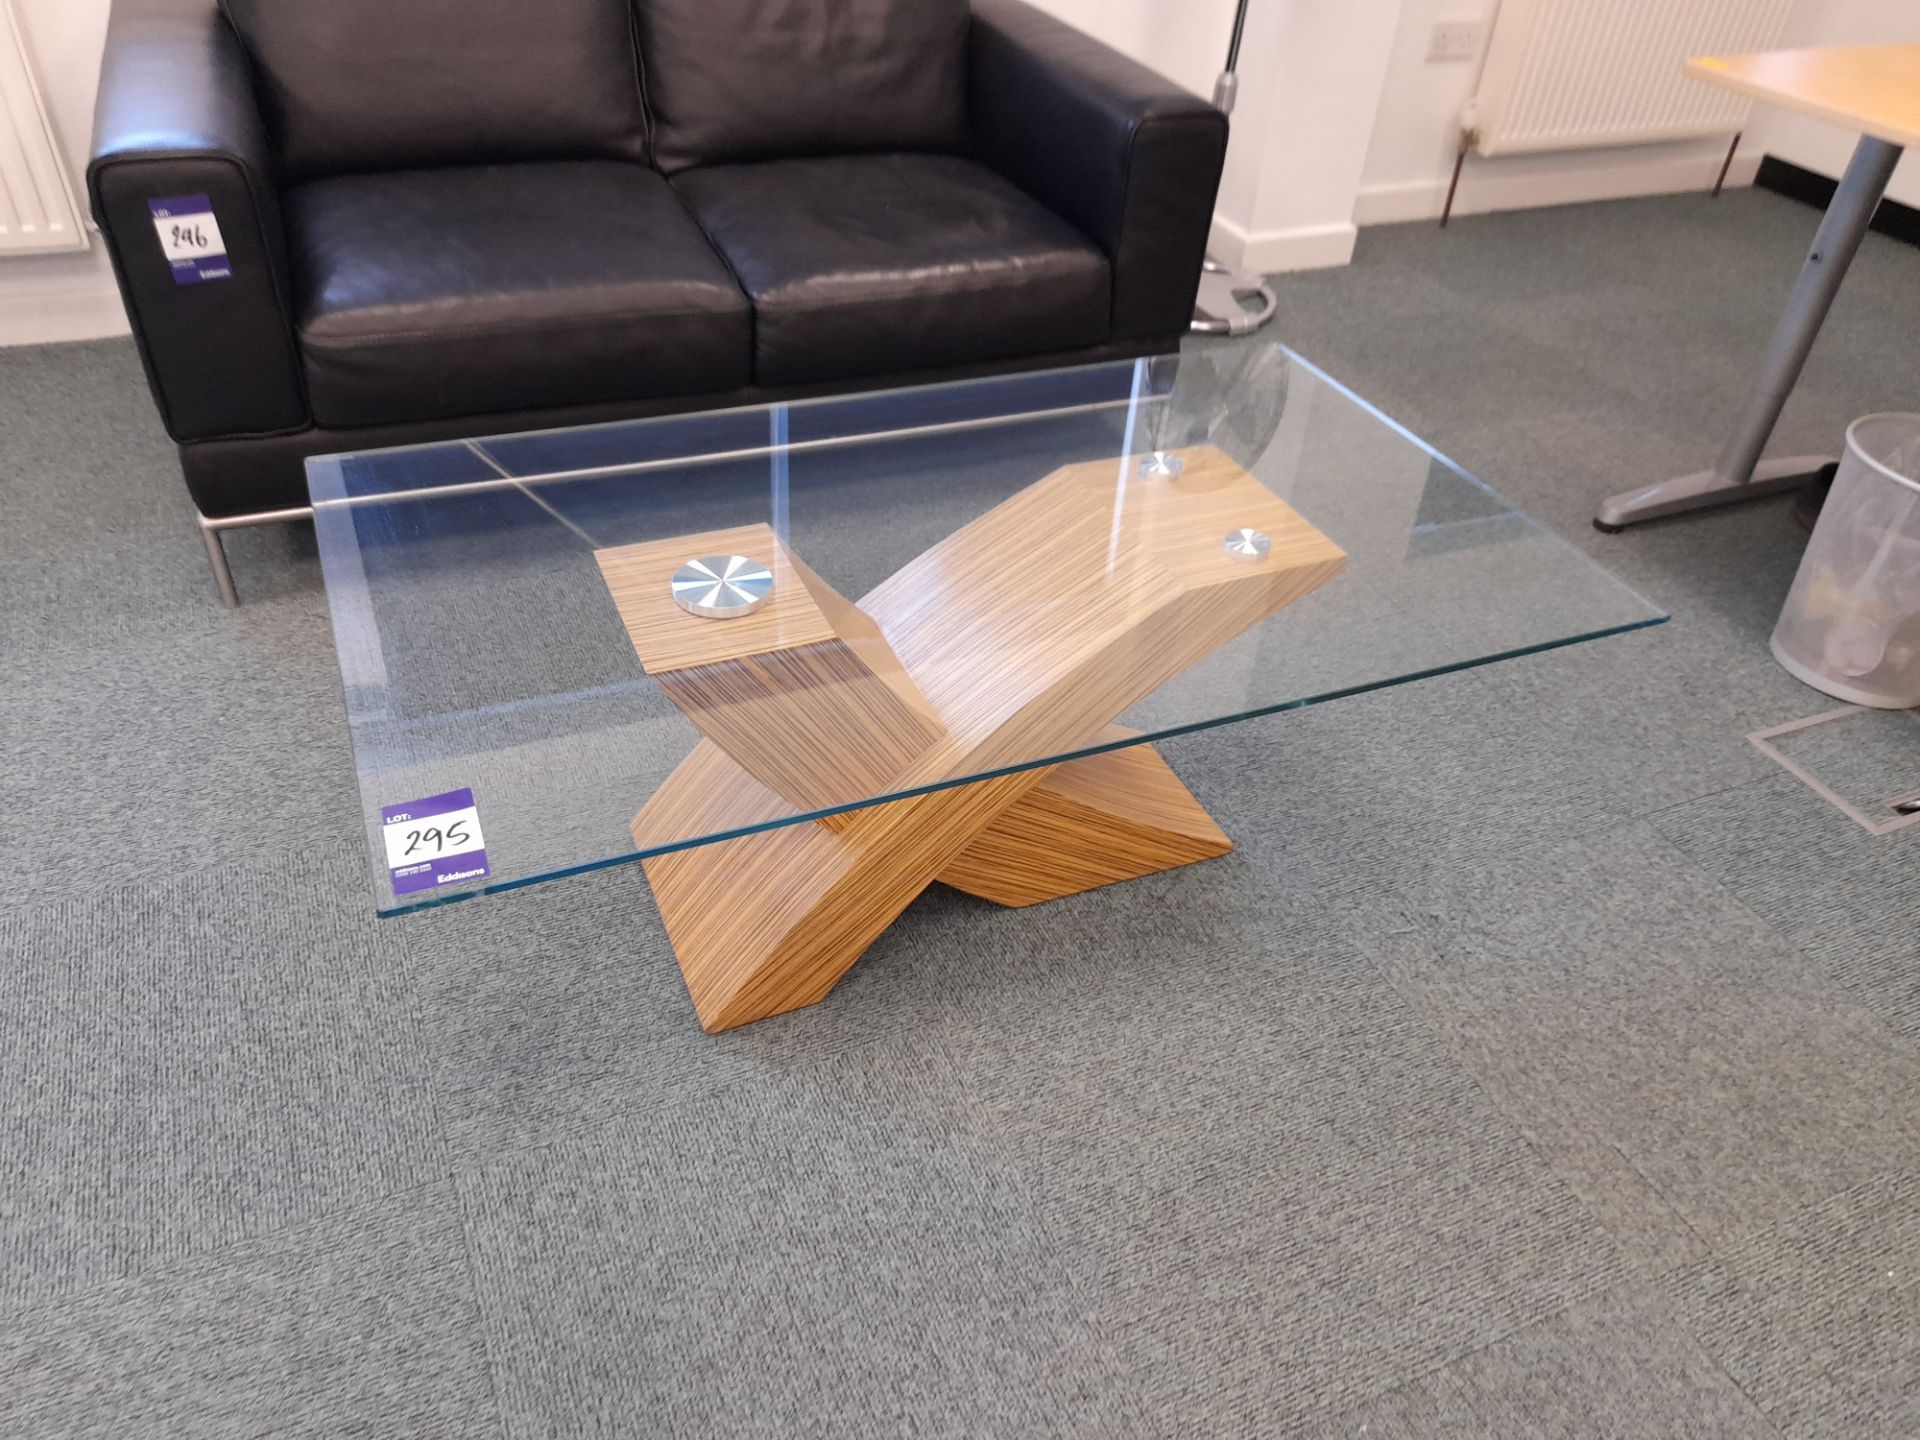 Contemporary glass topped coffee table, 1200mm x 700mm - Image 2 of 2